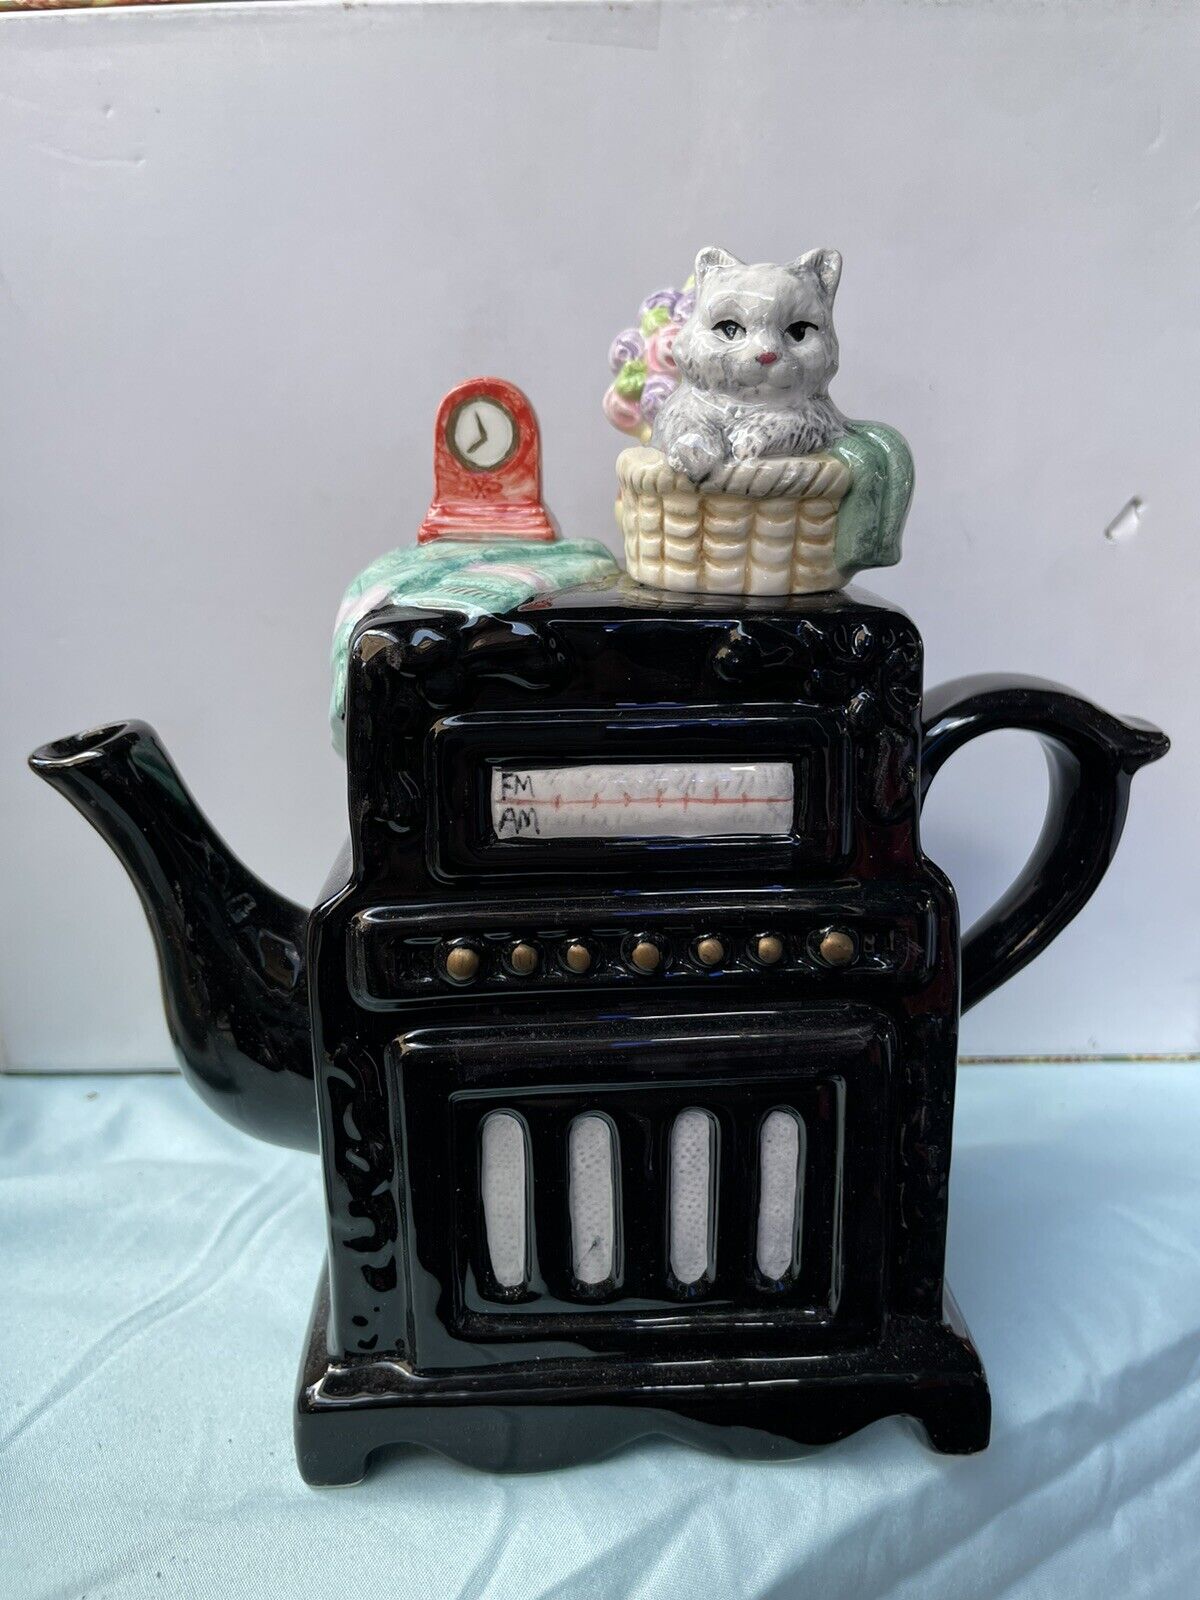 Vintage Teapot by Cardinal Inc. Cat on Radio Flowers Basket Clock Collectible